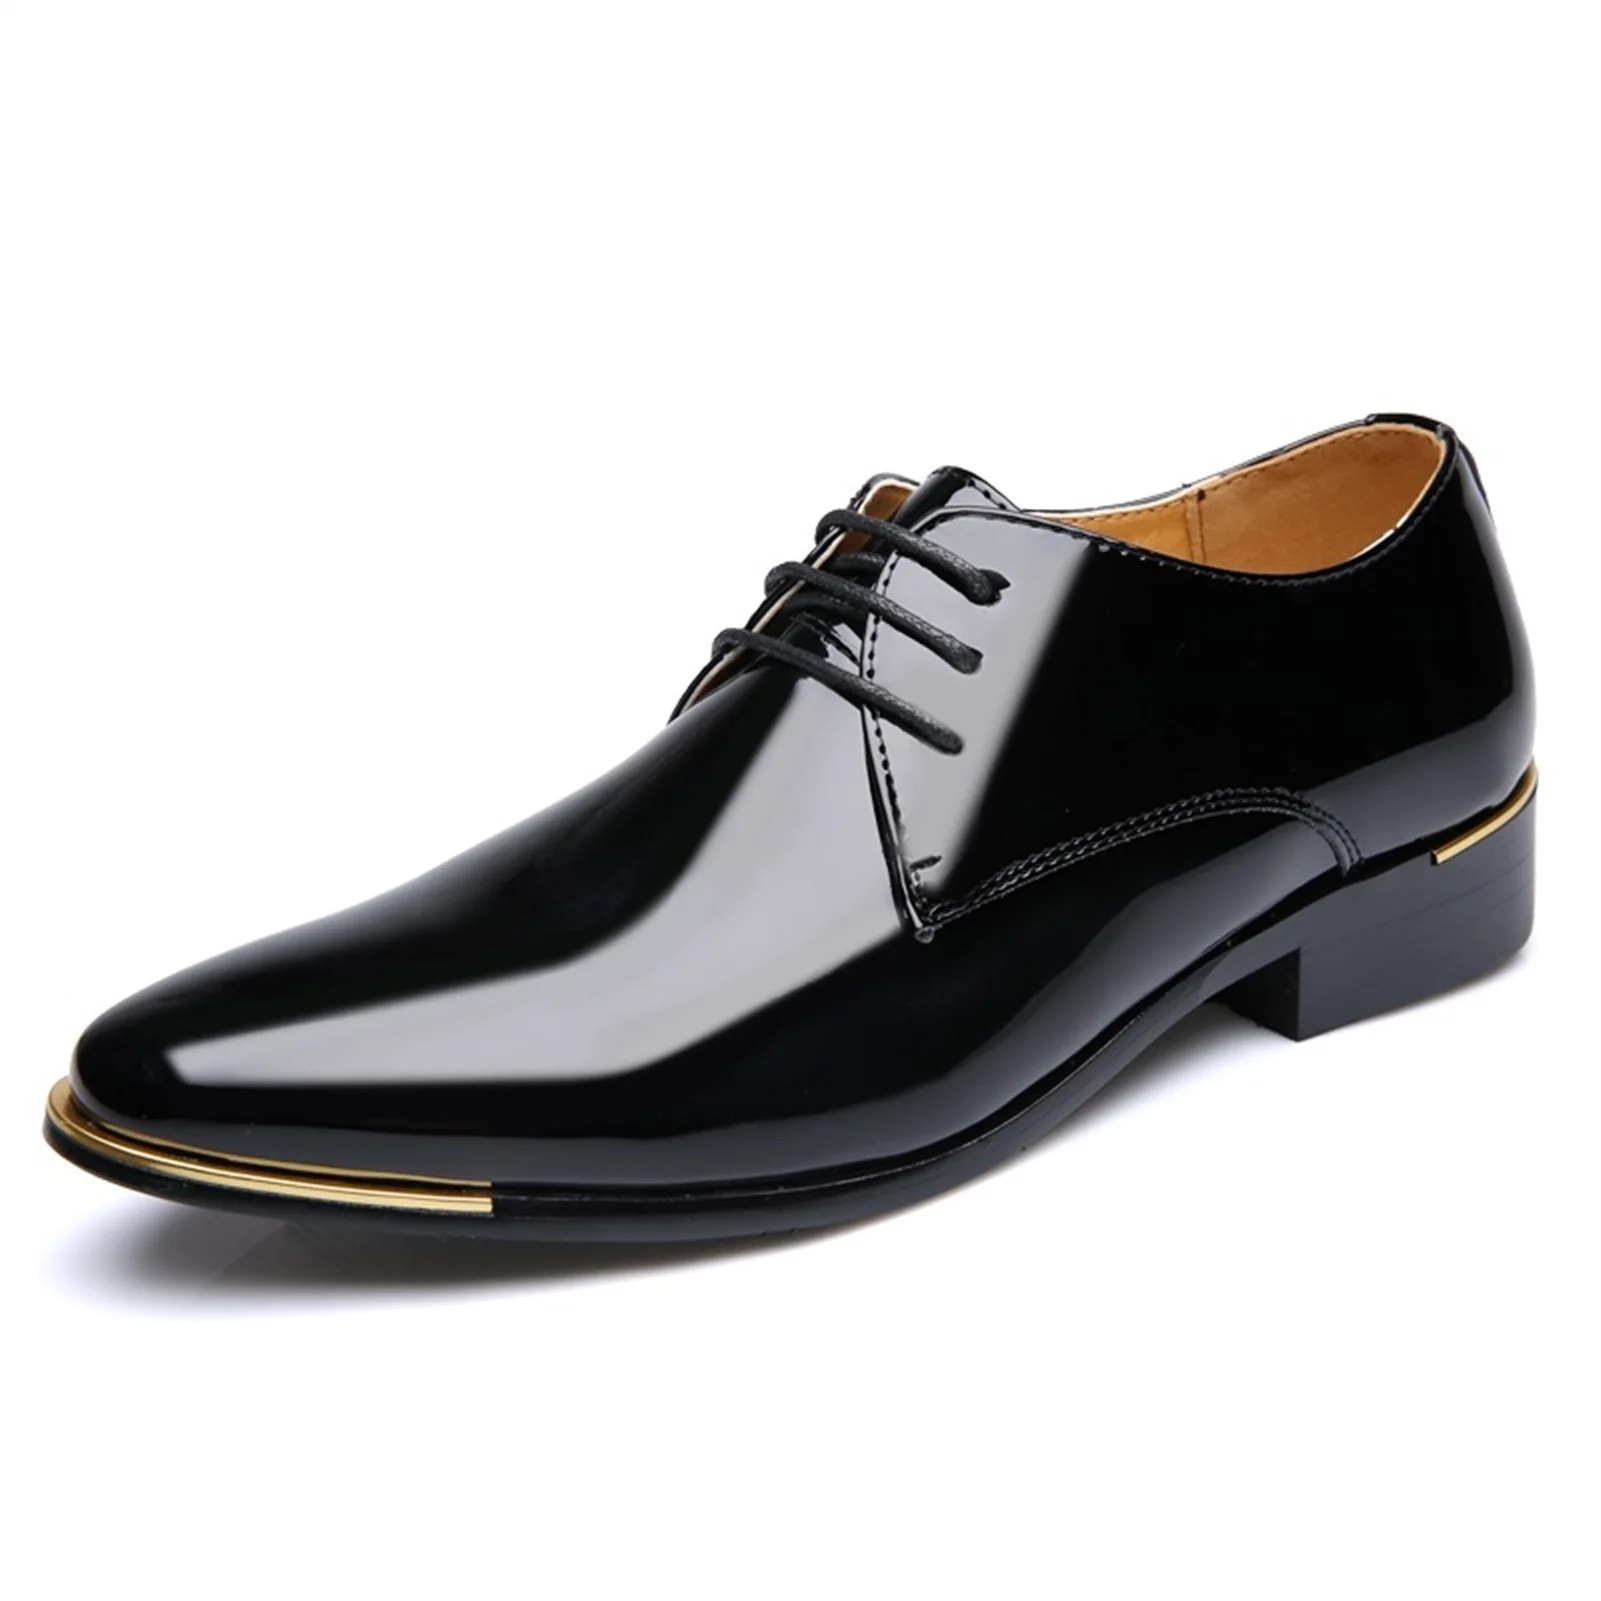 

Men's Lace up Patent Leather Oxfords Low Top Block Heel Office Wedding Shoes